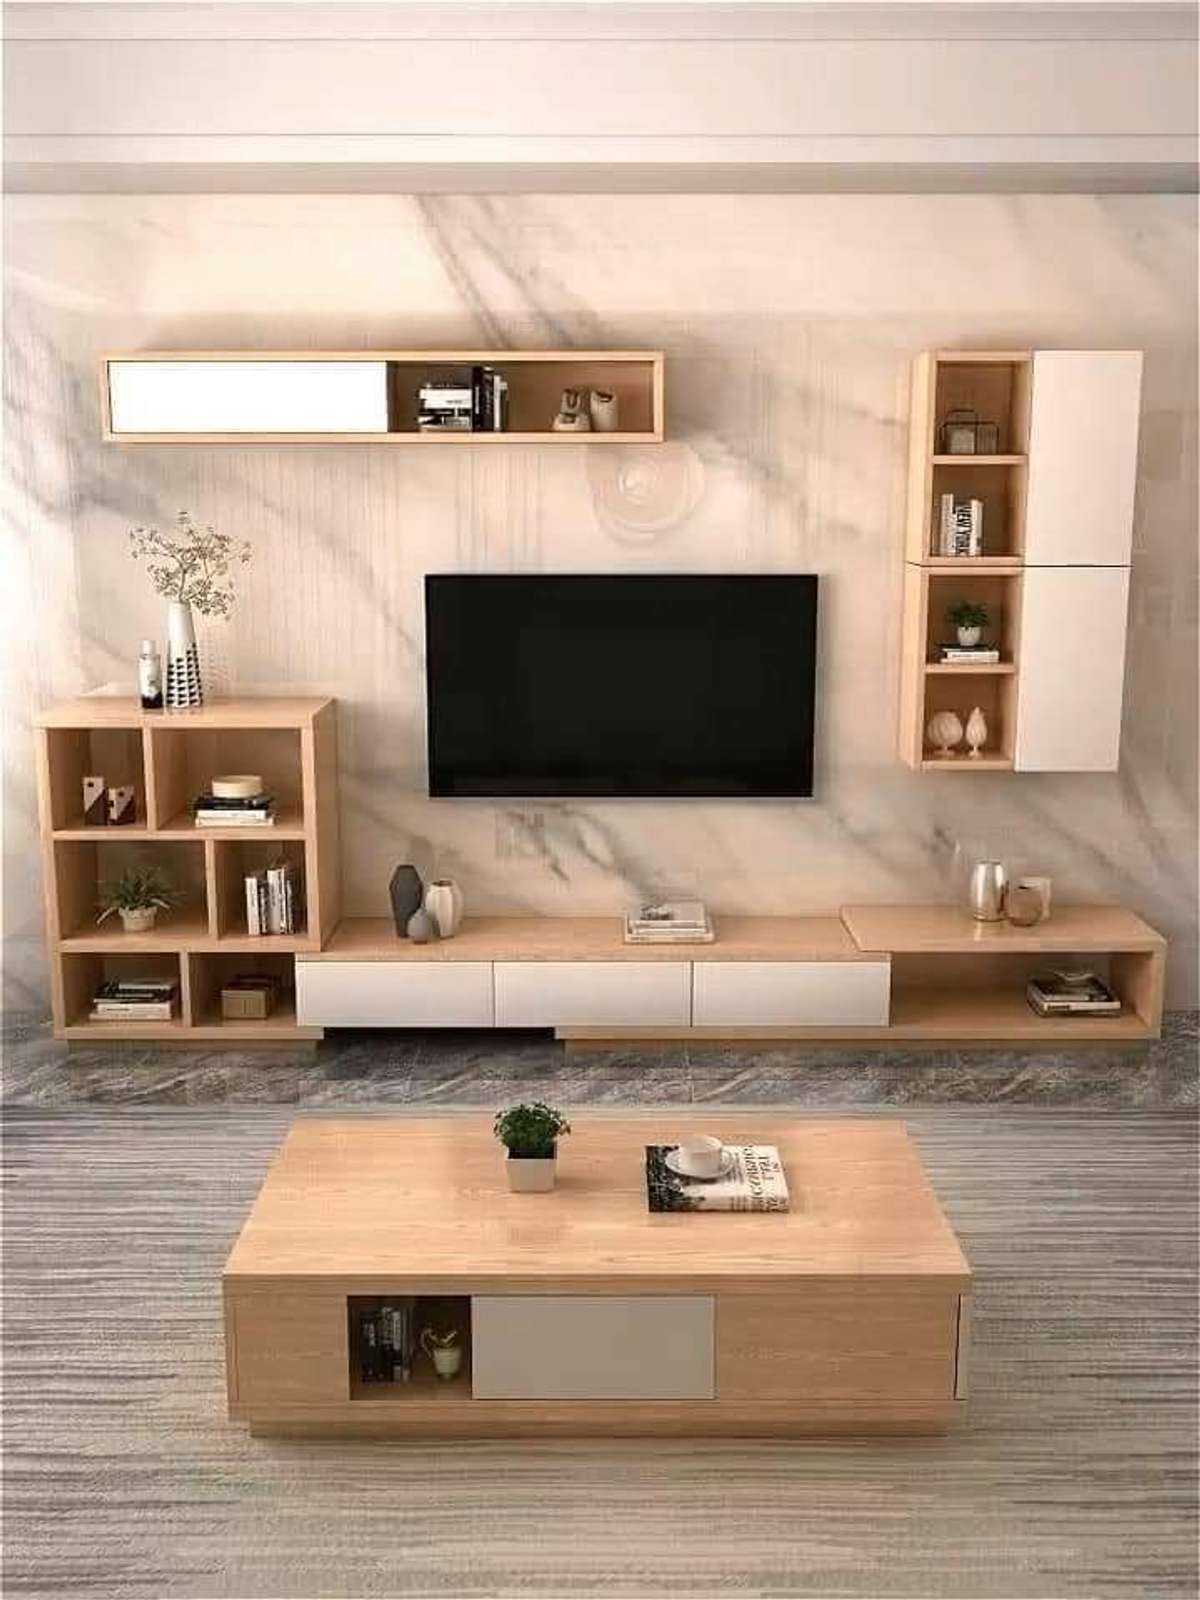 99 272 888 82 Call Me FOR Carpenters
modular  kitchen, wardrobes, false ceiling, cots, Study table, everything you needs
I work only in labour square feet material you should give me, Carpenters available in All Kerala, I'm ഹിന്ദി Carpenters, Any work please Let me know?
_________________________________________________________________________
#kerala #architecture, #kerala #architect, #kerala #architecture